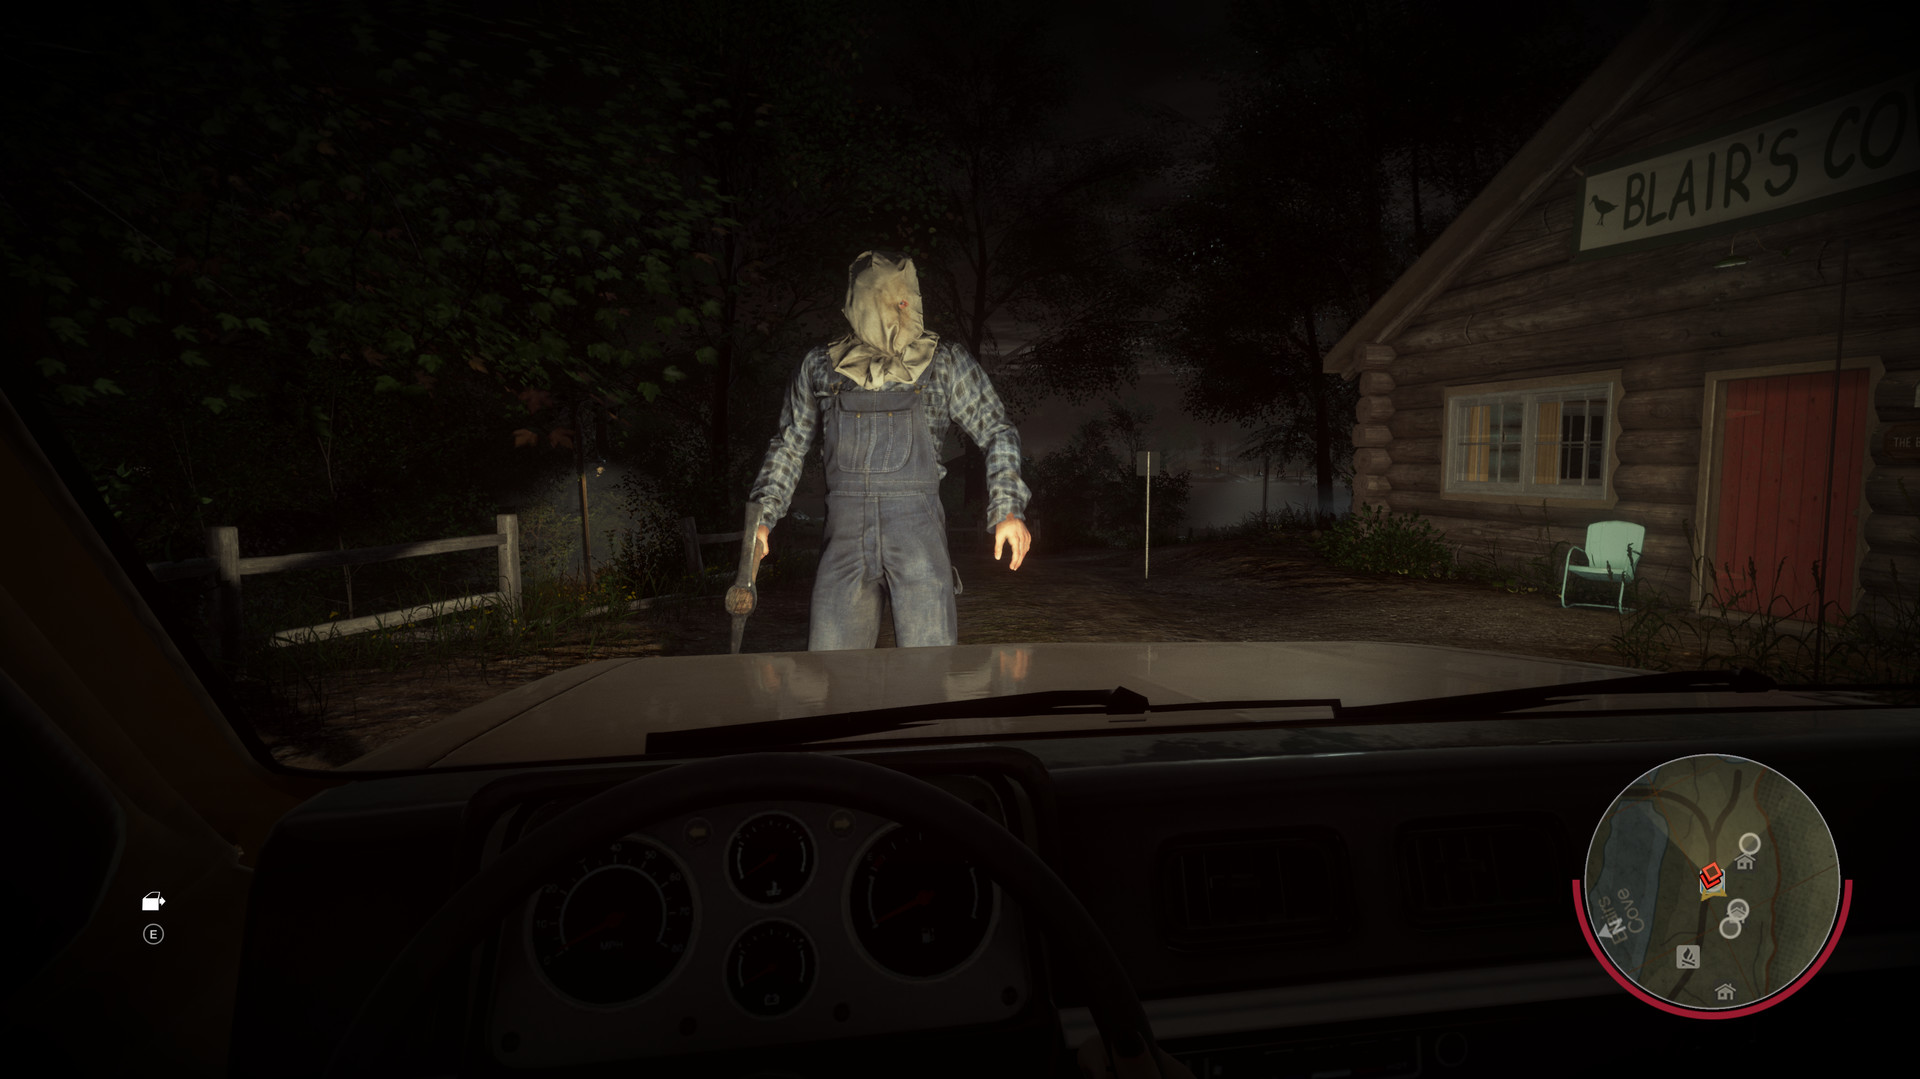 Just got Uber Jason in Friday The 13th killer puzzle : r/fridaythe13th